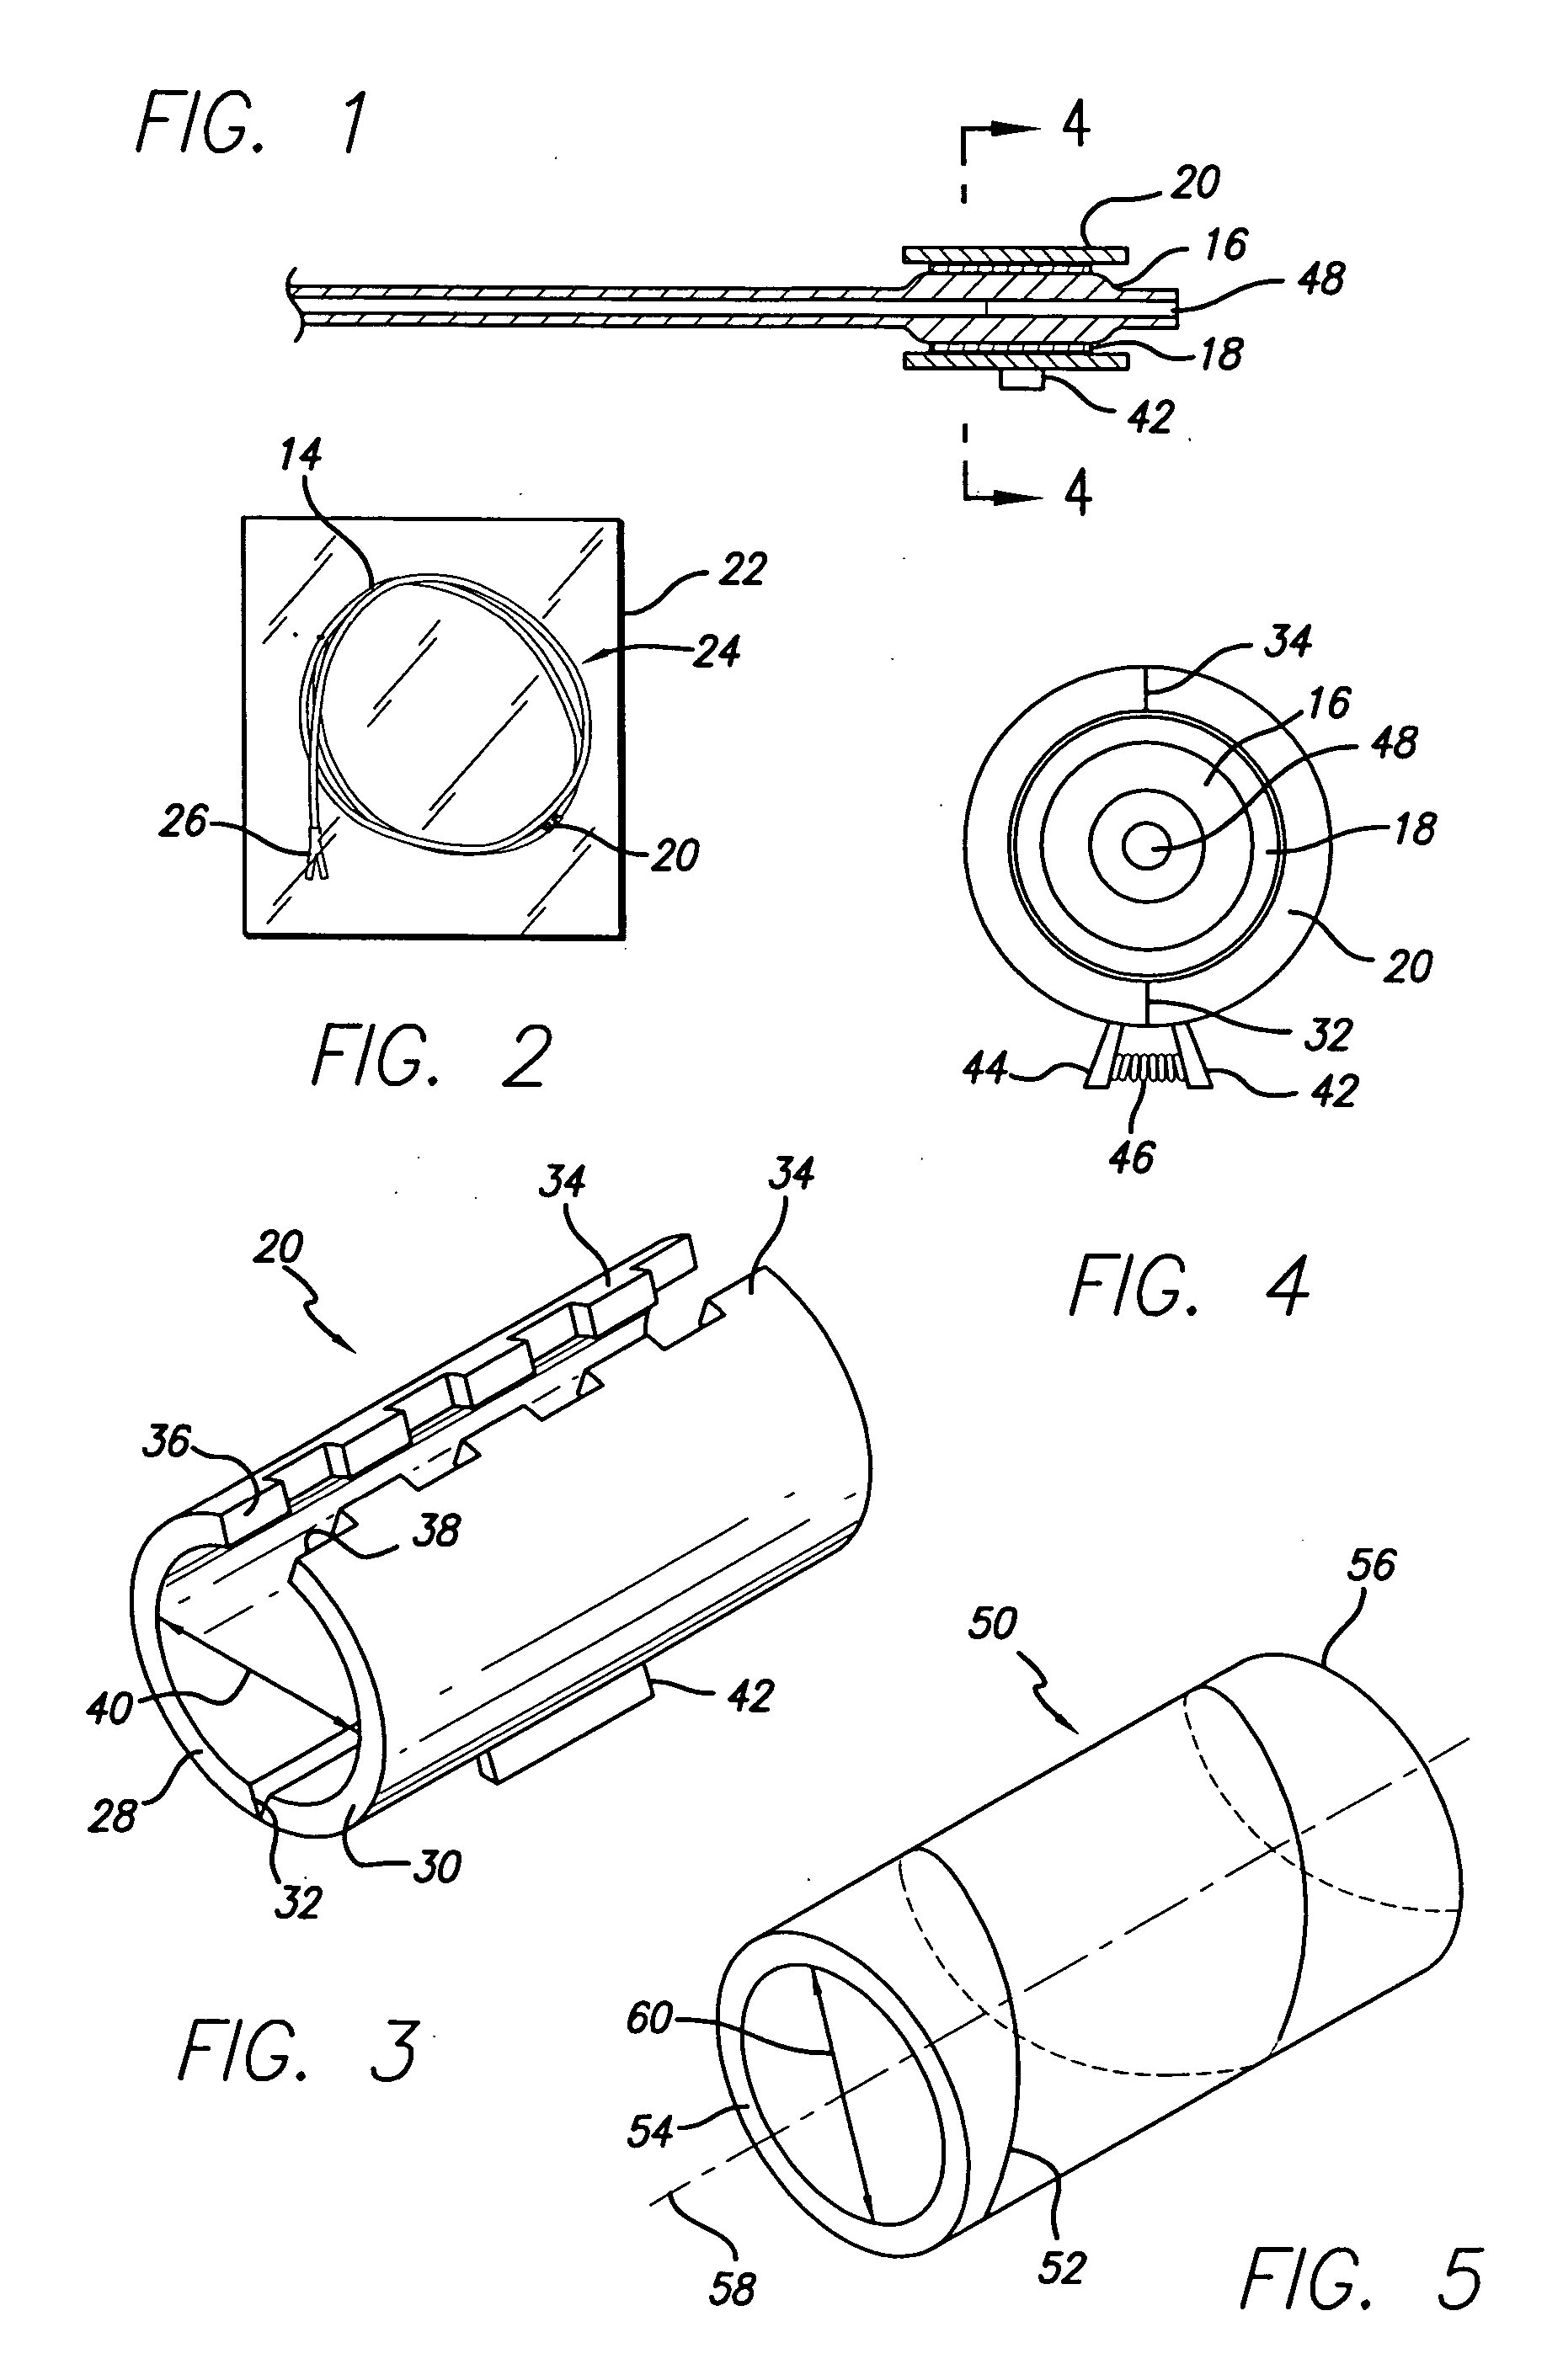 Packaging sheath for drug coated stent